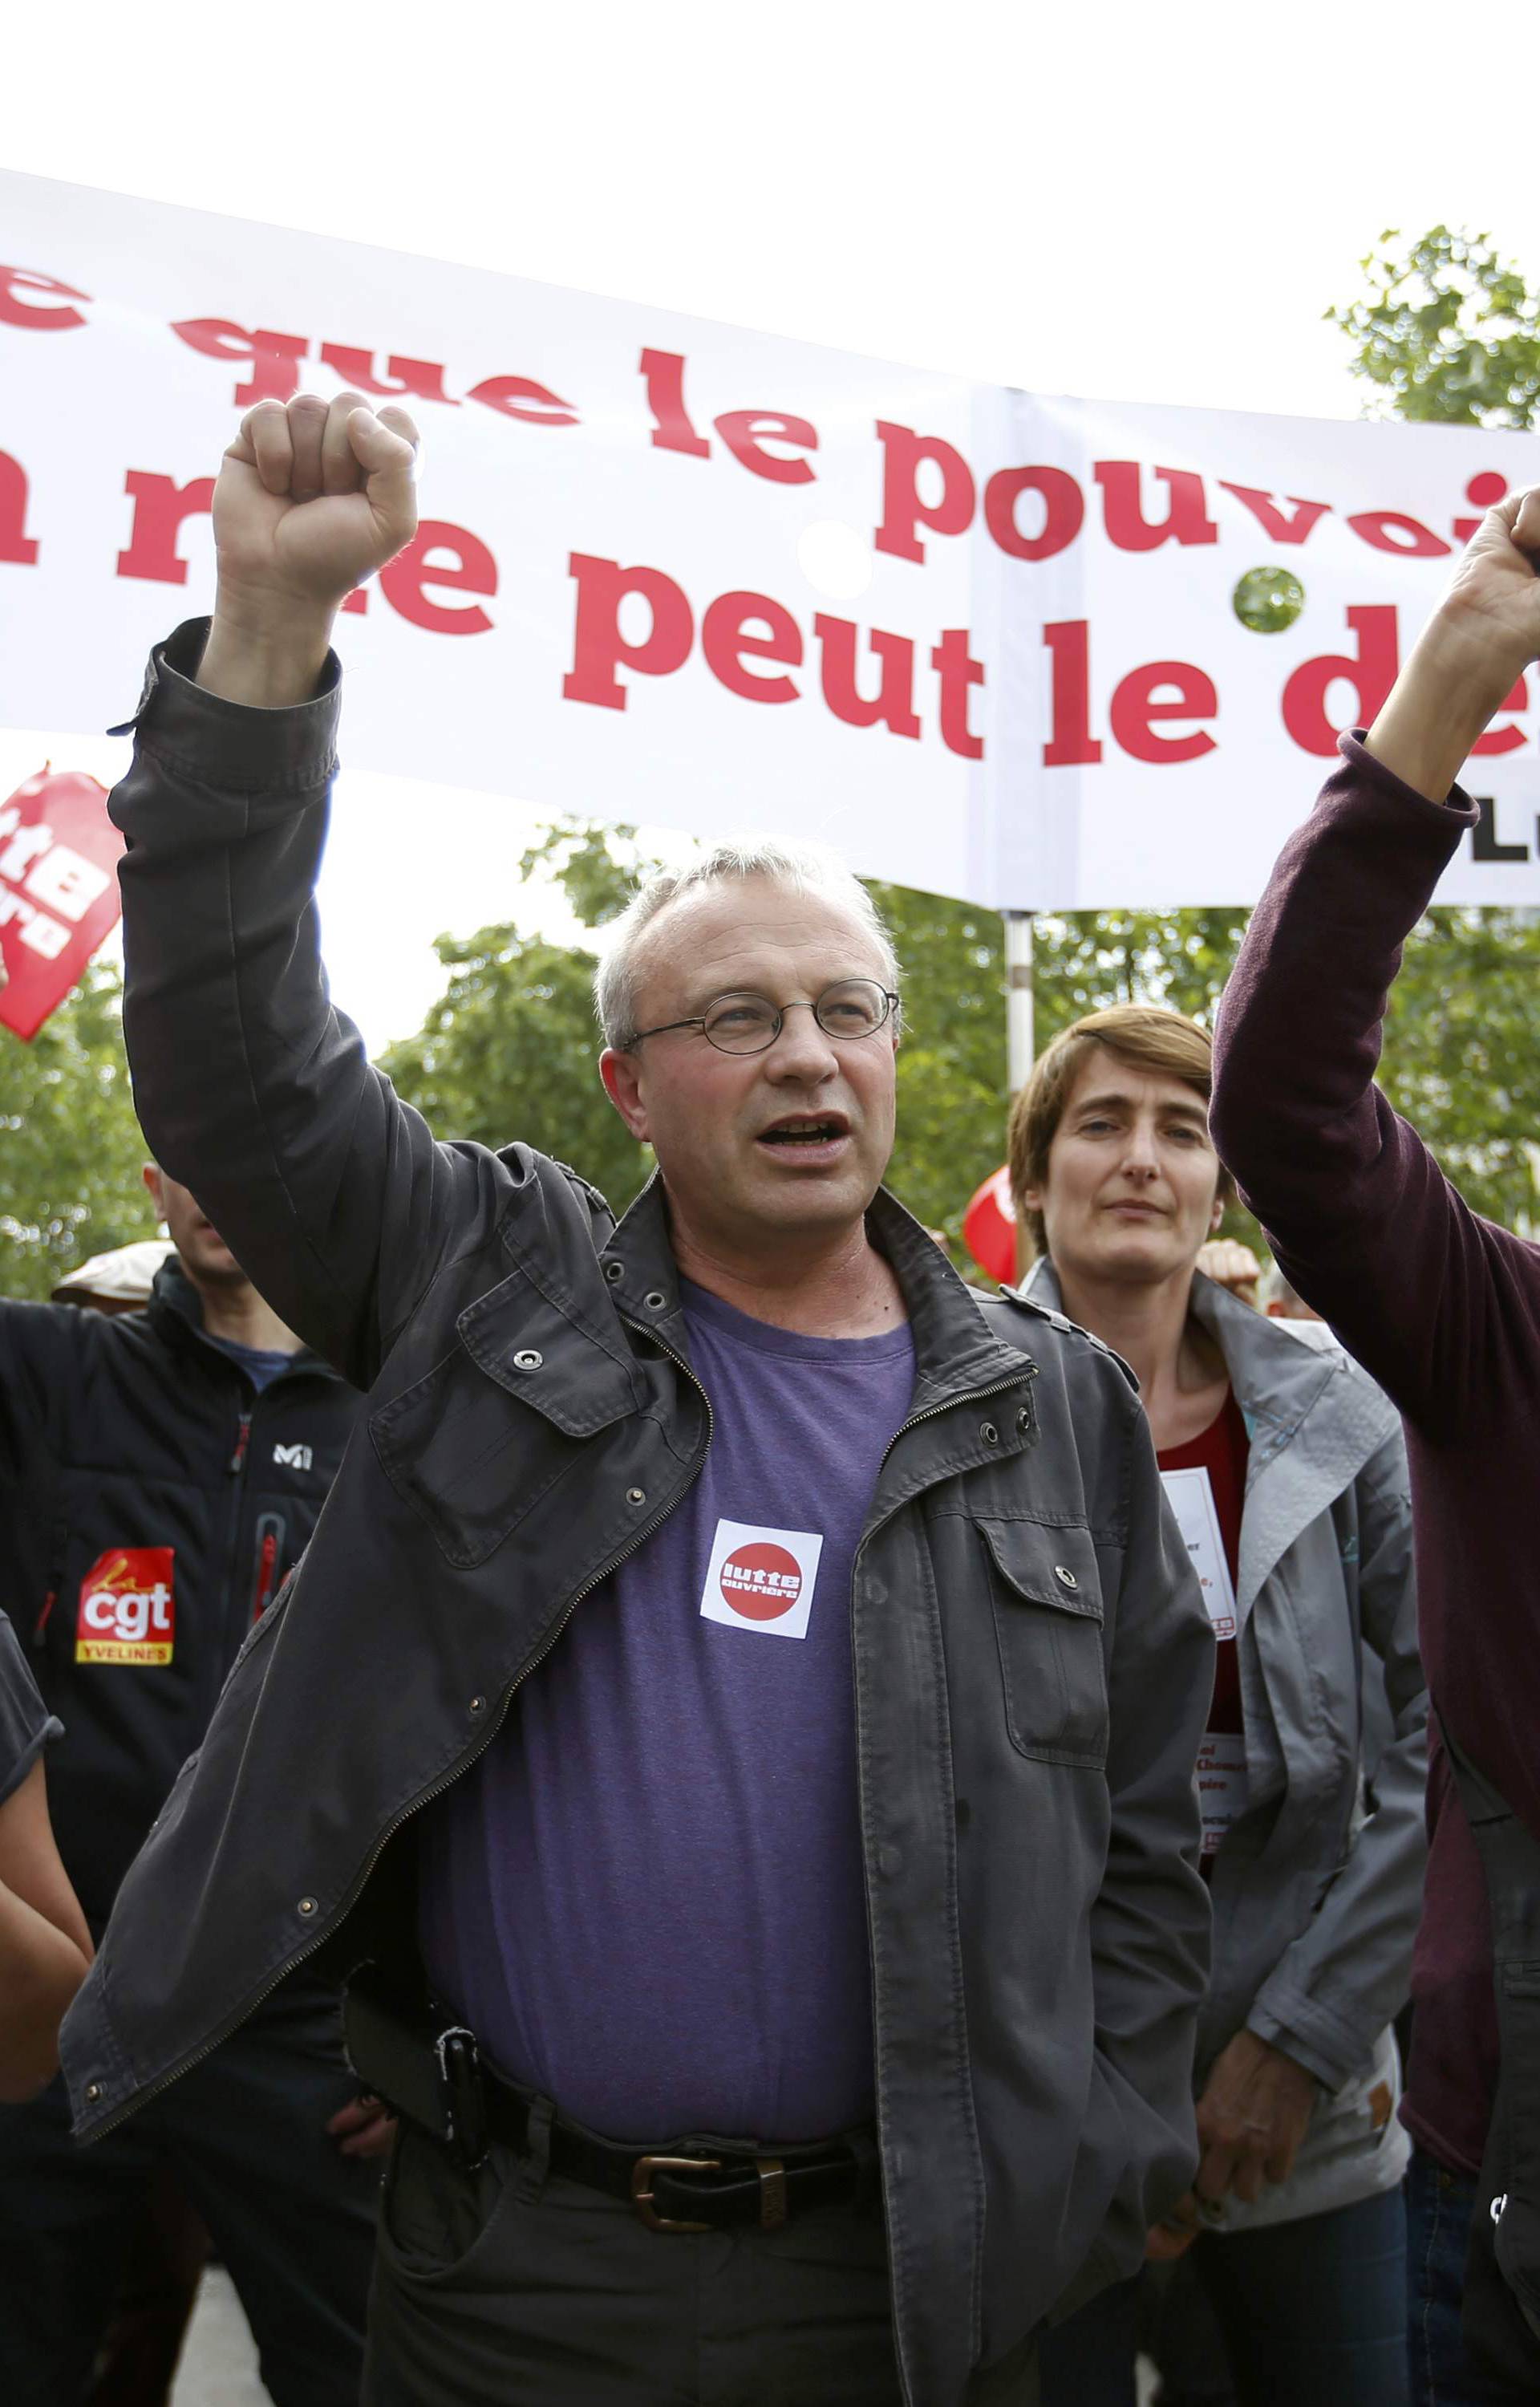  French labour union members march during a demonstration in protest of the government's proposed labor law reforms in Paris